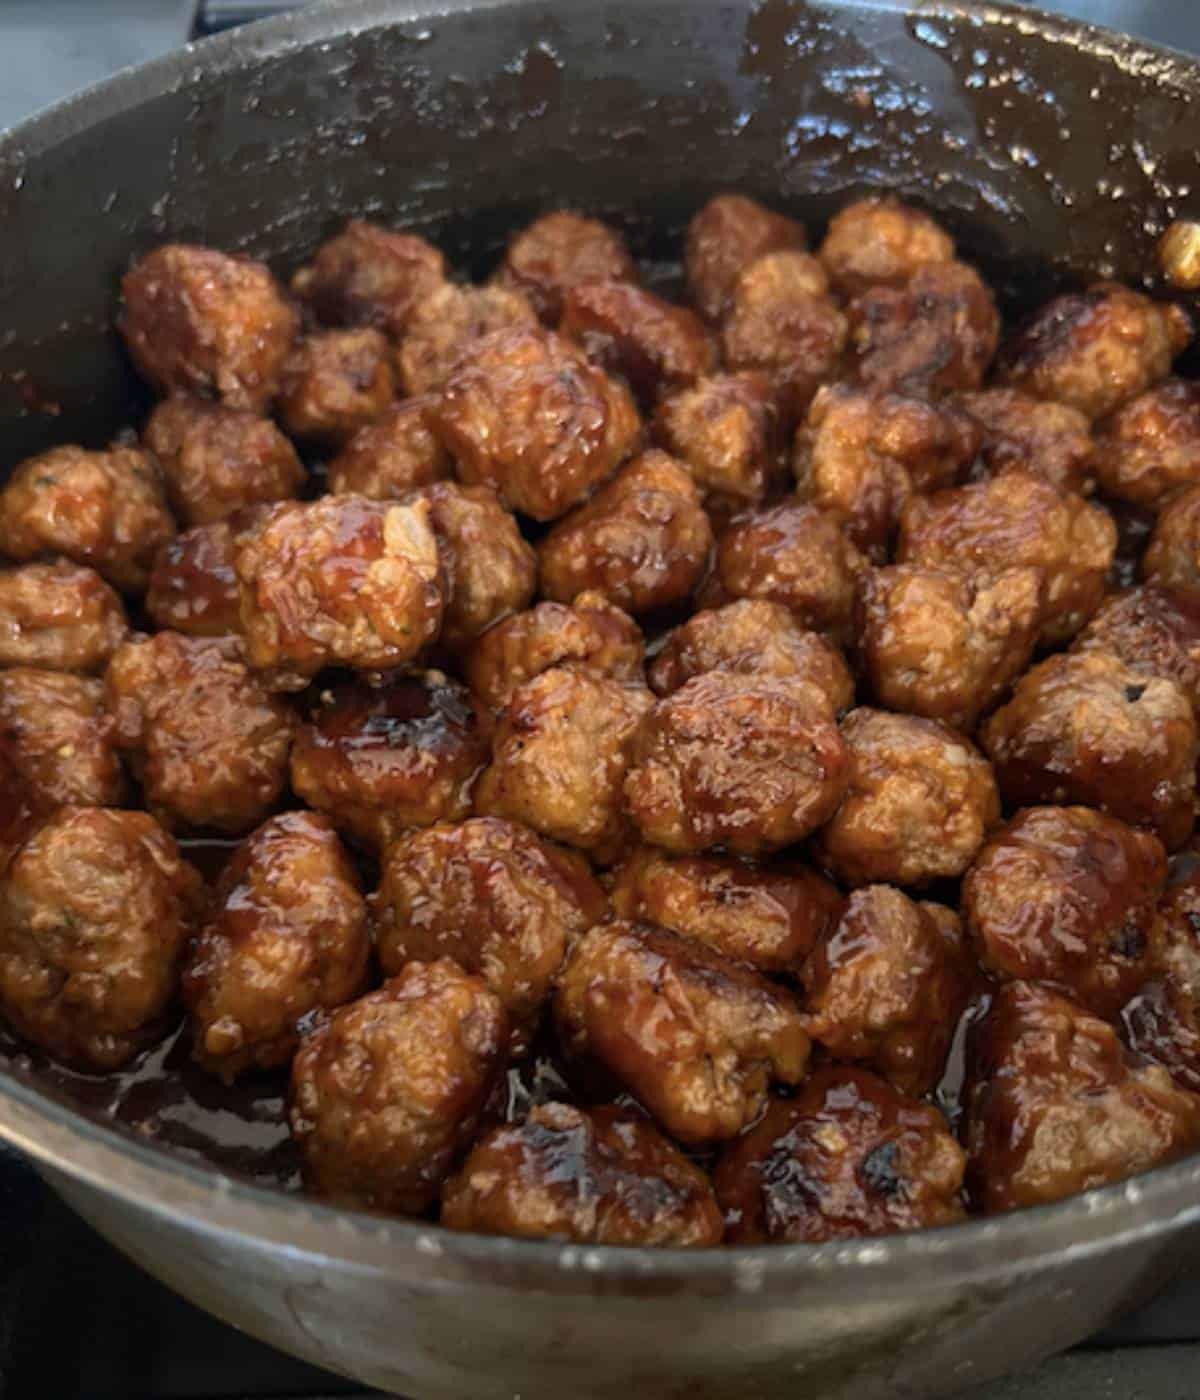 Mini meatballs tossed in sweet and sour sauce.